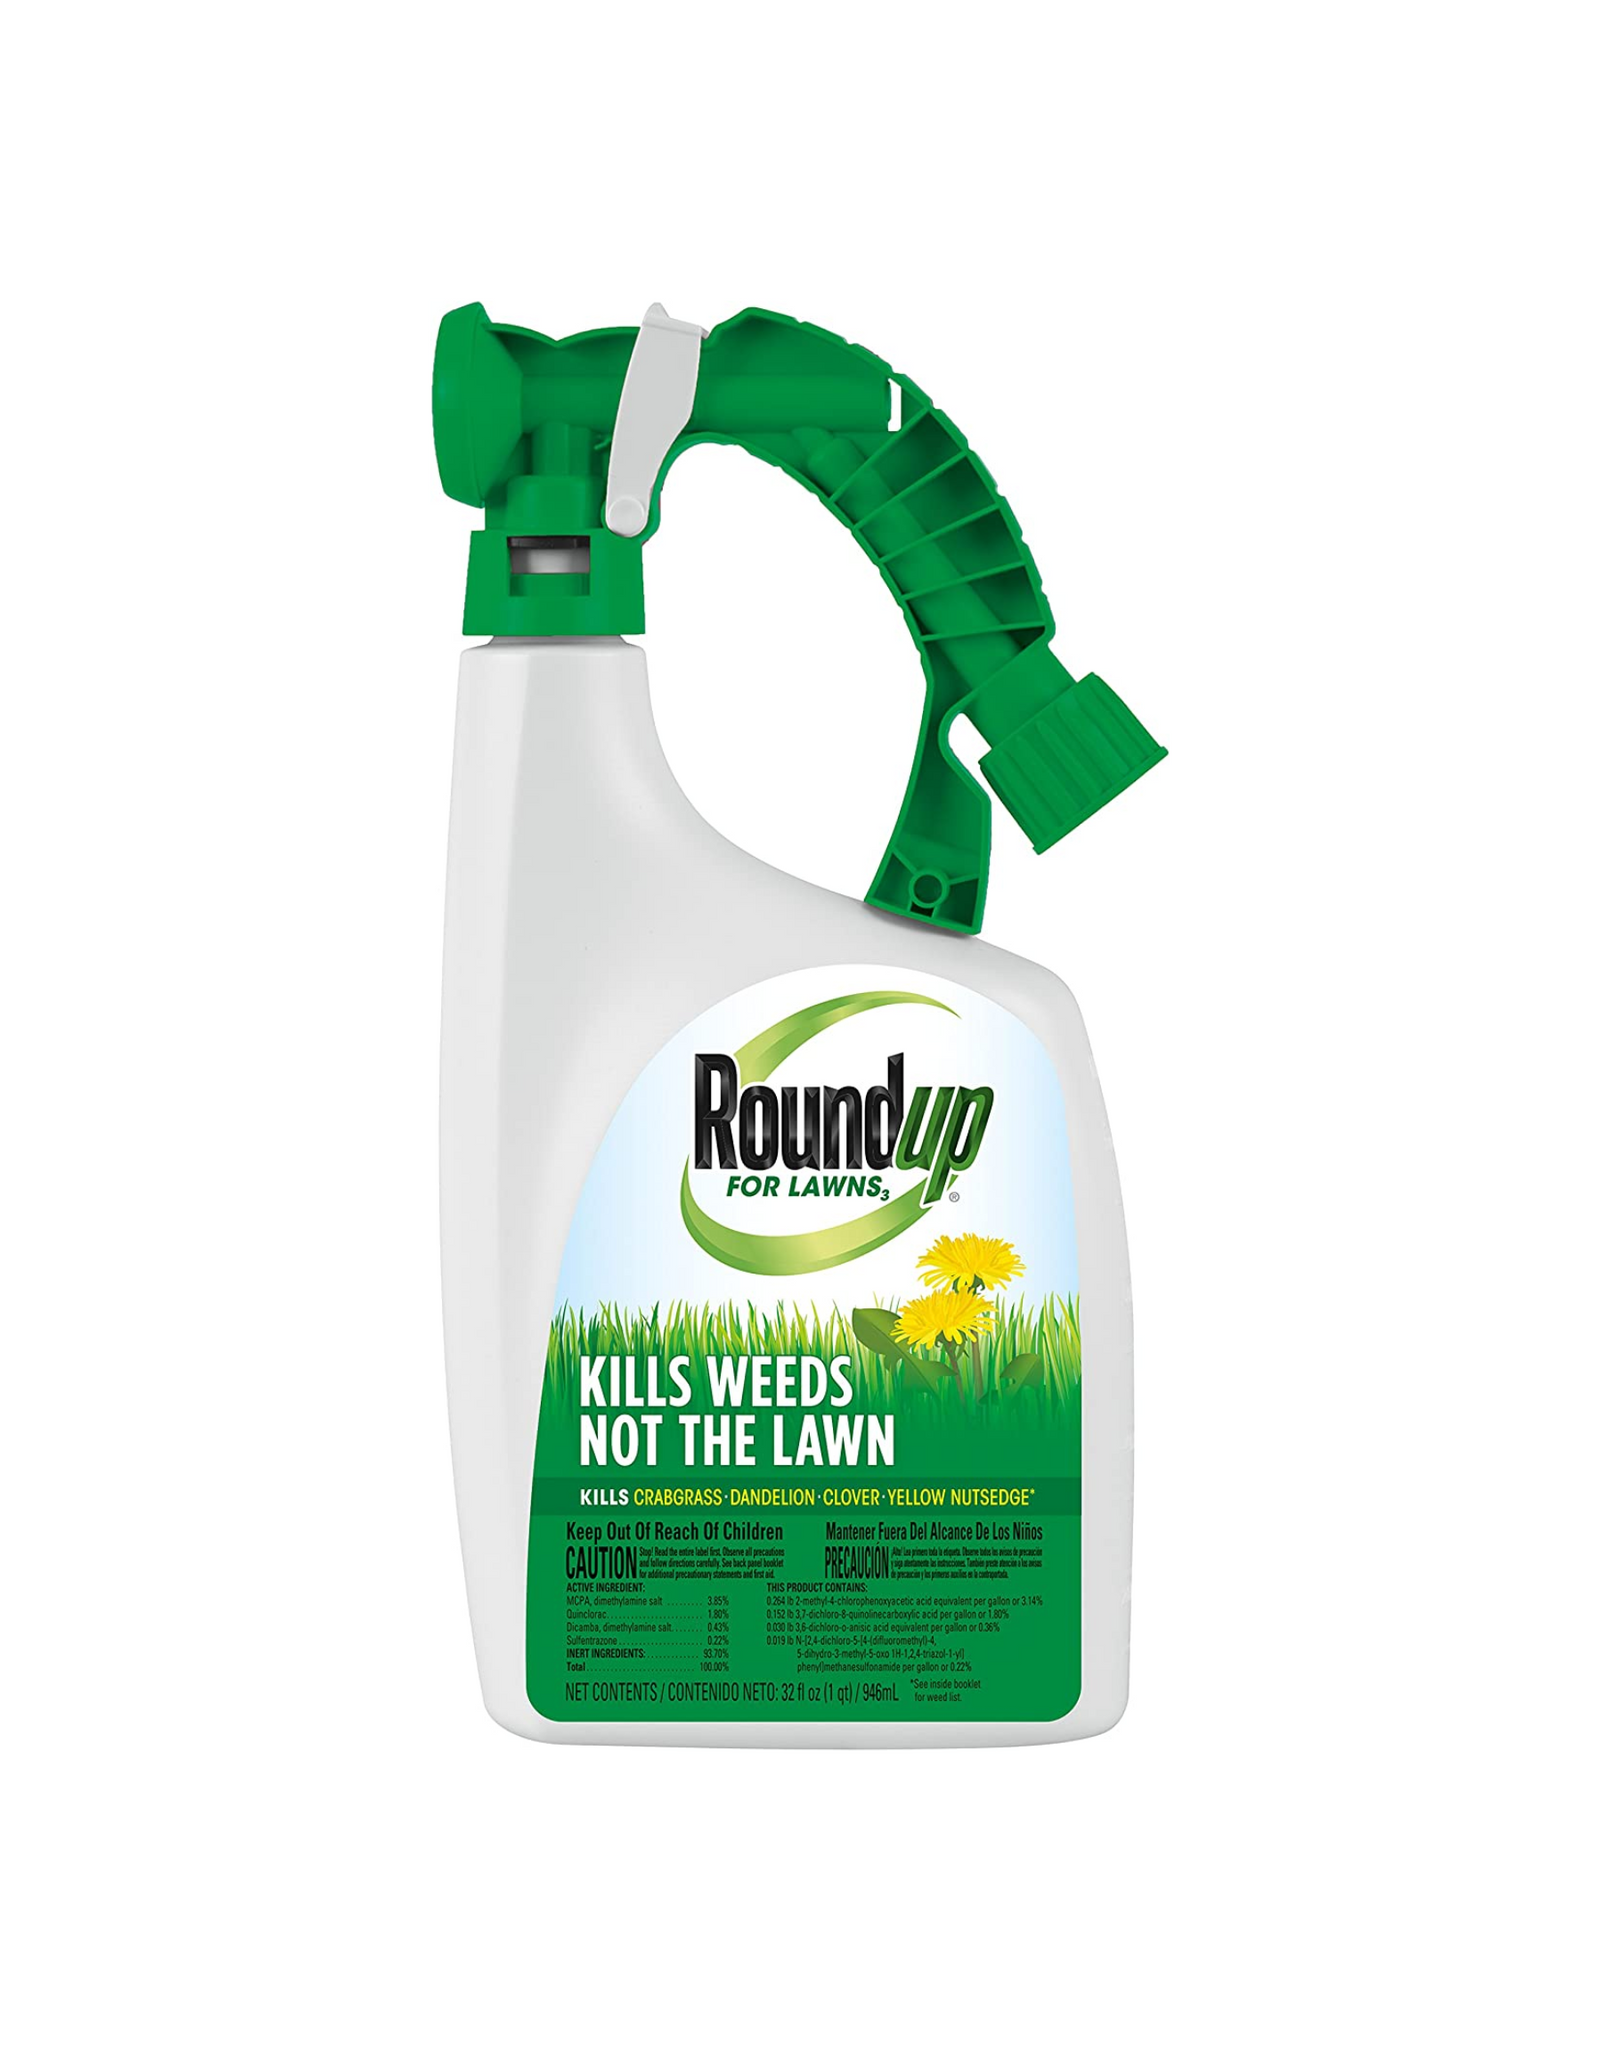 Roundup For Lawns3 Ready-To-Spray, 32 oz. - Lawn Safe Weed Killer for Northern Lawns, Kills Crabgrass, Dandelion, Clover and Yellow Nutsedge